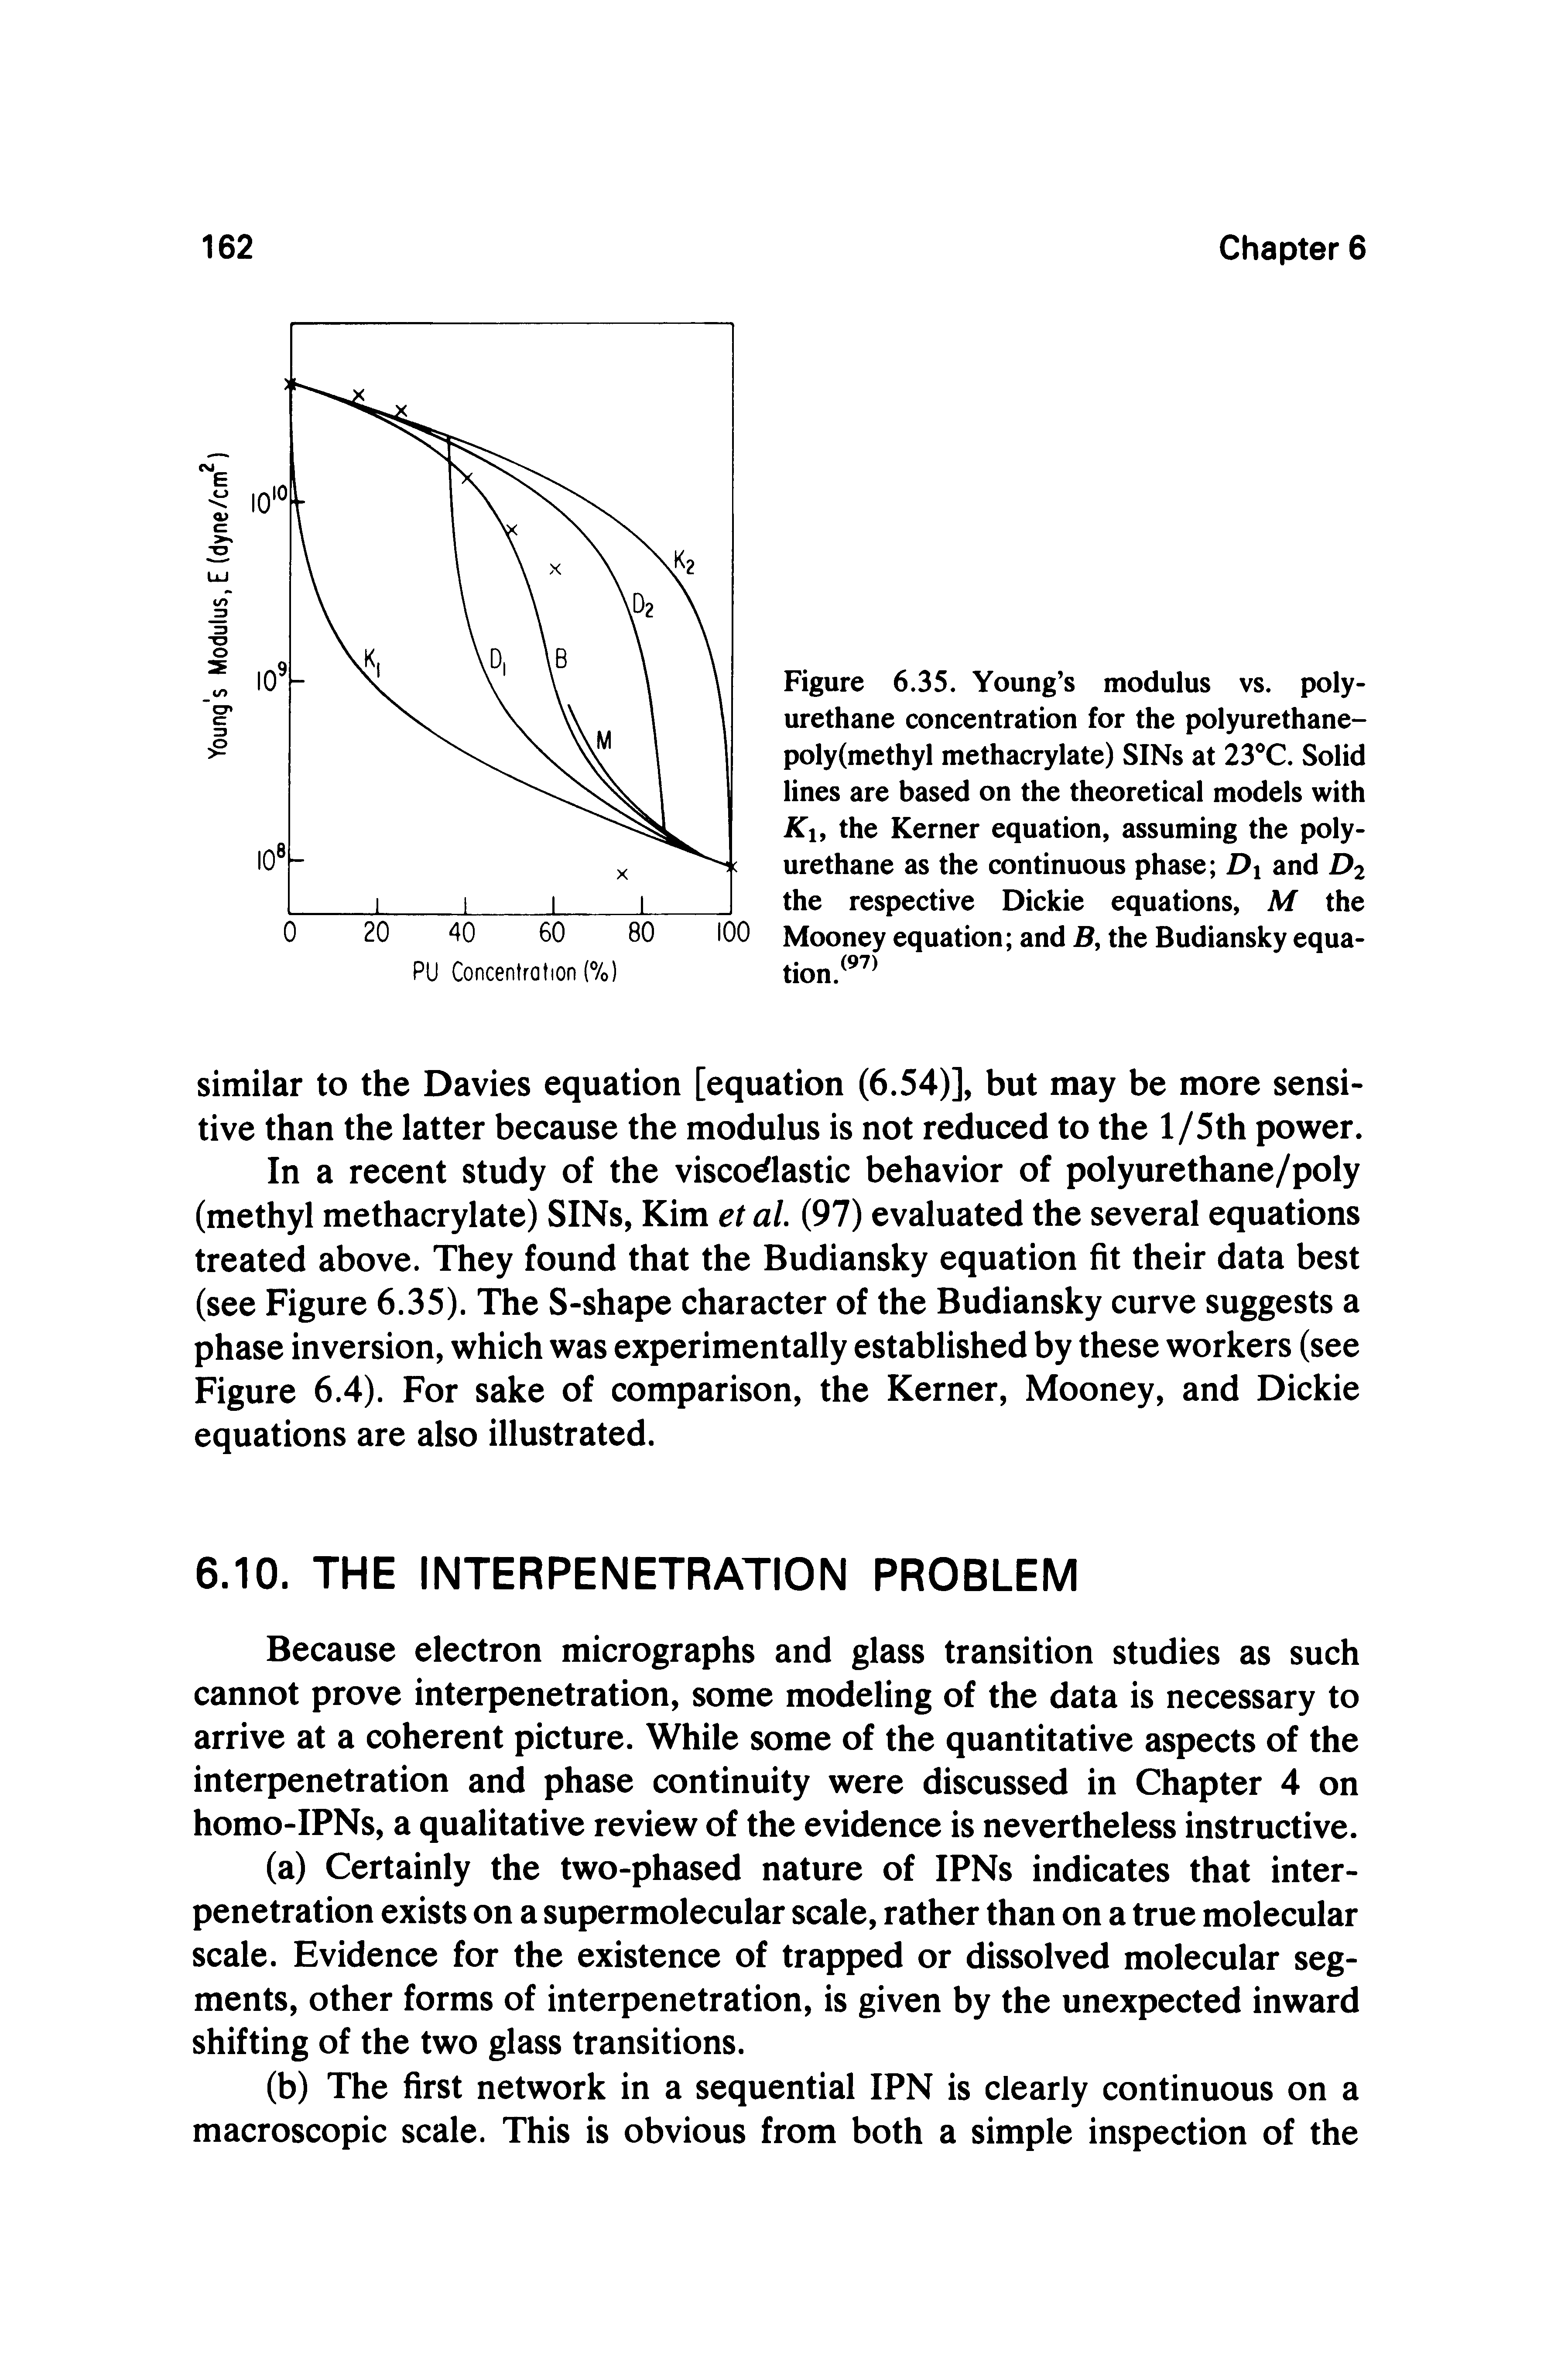 Figure 6.35. Young s modulus vs. polyurethane concentration for the polyurethane-poly(methyl methacrylate) SINs at 23 C. Solid lines are based on the theoretical models with K, the Kerner equation, assuming the polyurethane as the continuous phase Z>i and D2 the respective Dickie equations, M the Mooney equation and B, the Budiansky equa-...